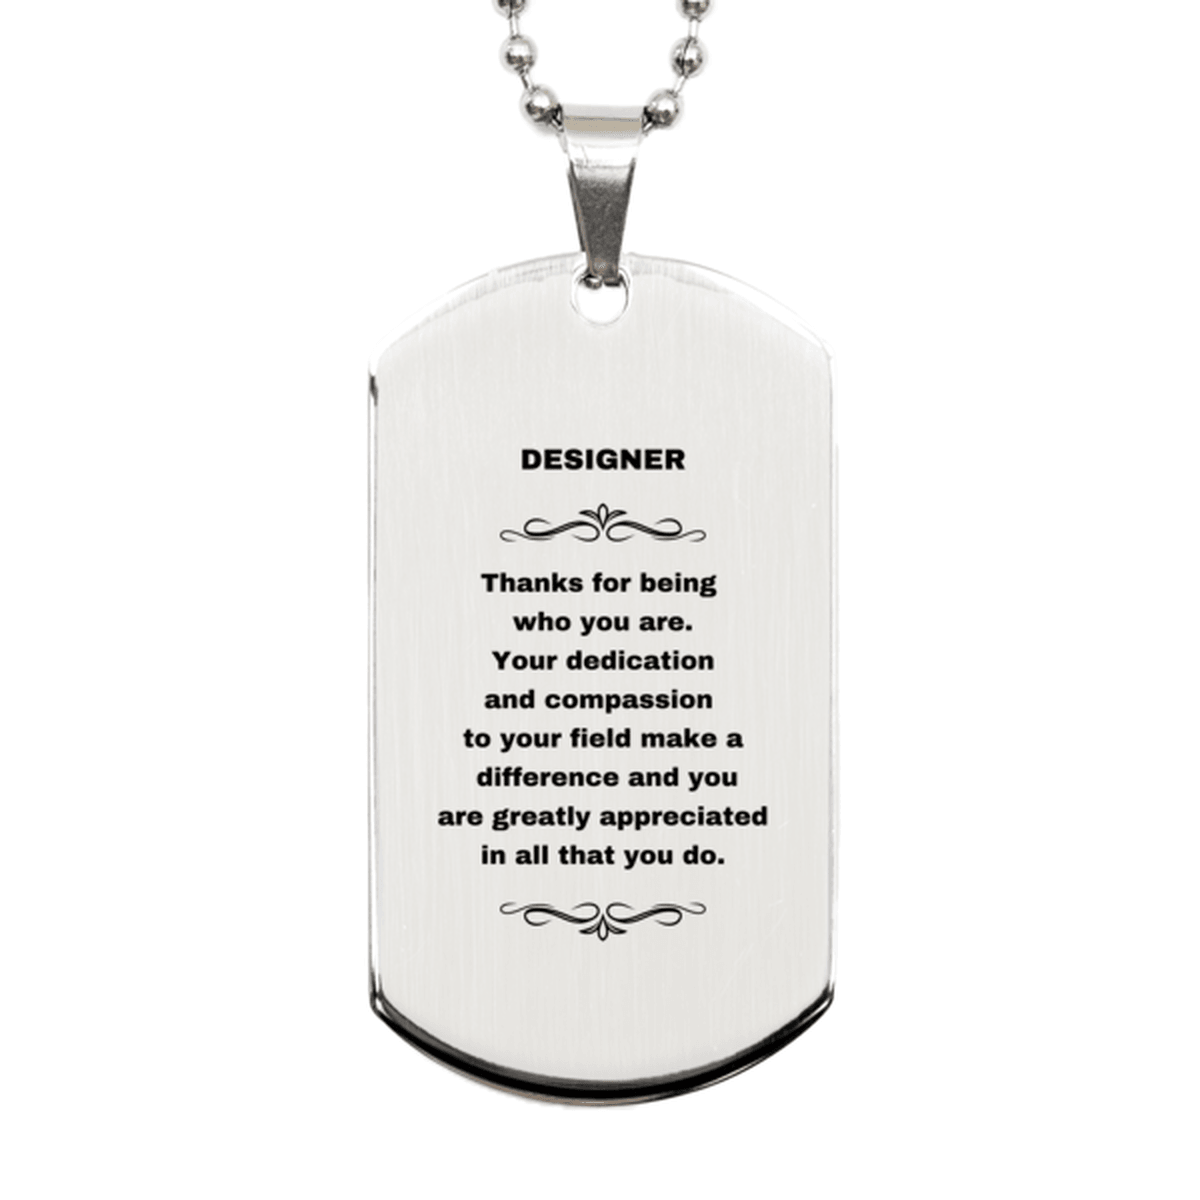 Designer Silver Dog Tag Necklace Engraved Bracelet - Thanks for being who you are - Birthday Christmas Jewelry Gifts Coworkers Colleague Boss - Mallard Moon Gift Shop